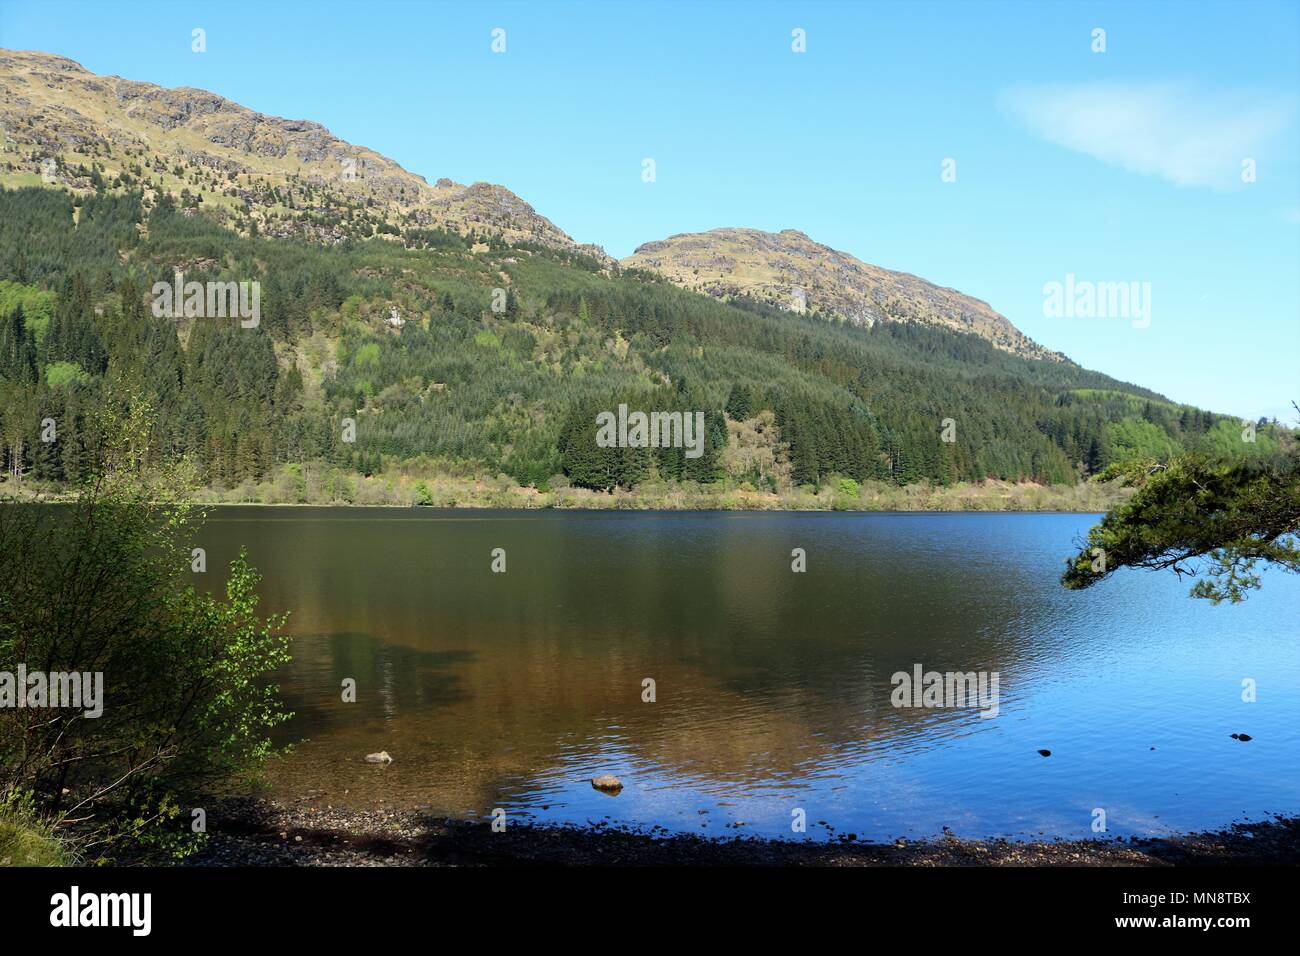 Beautiful Loch Eck, Scotland, UK on a clear sunny day showing water and ...